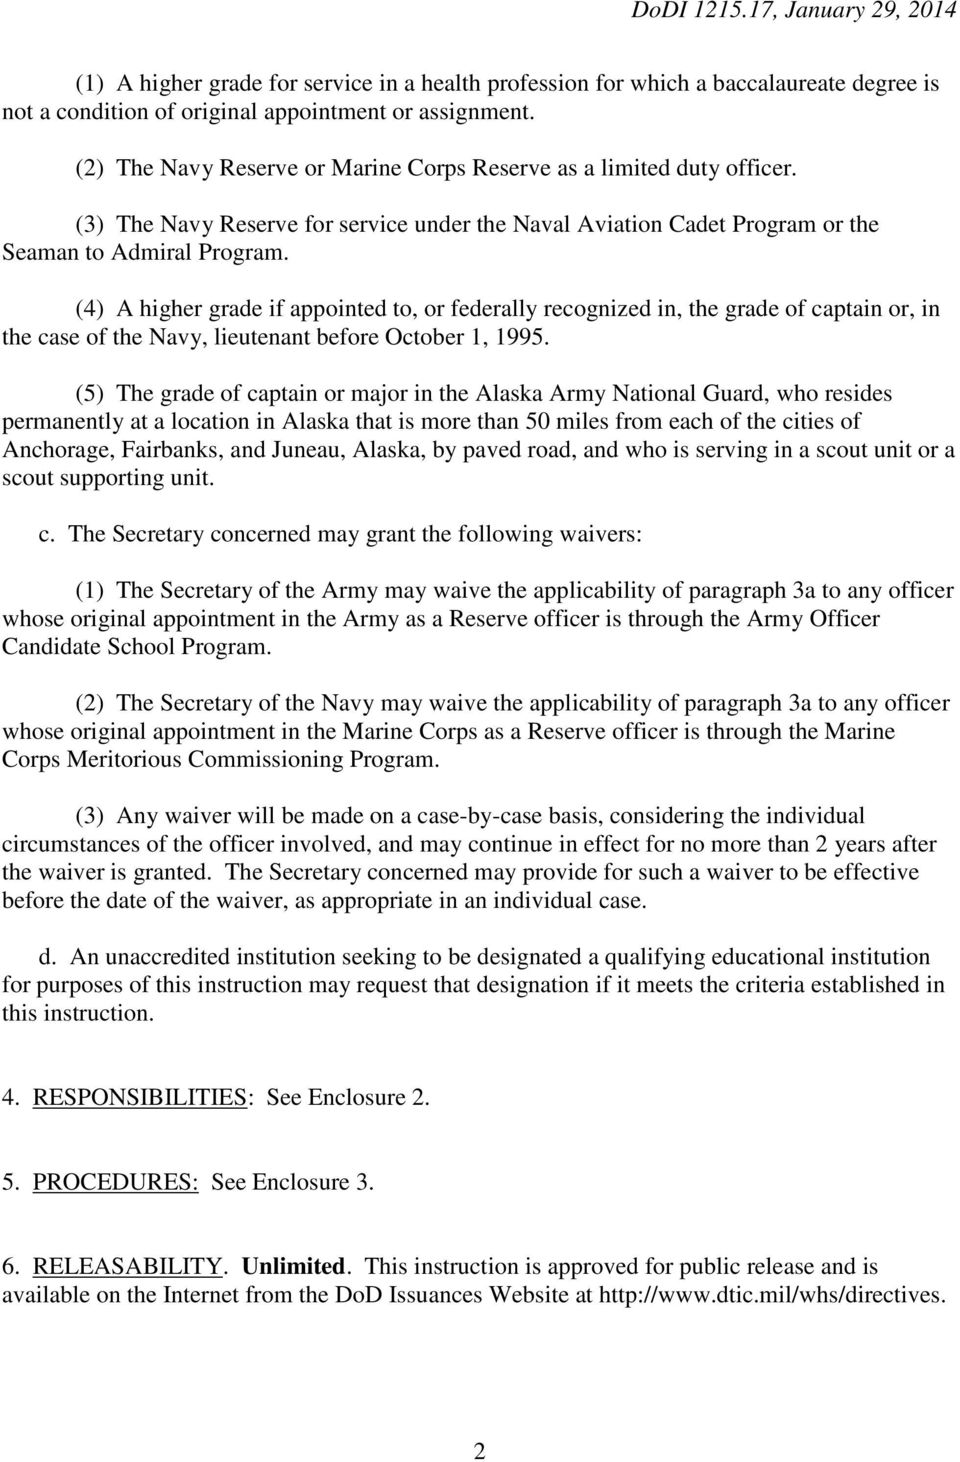 (4) A higher grade if appointed to, or federally recognized in, the grade of captain or, in the case of the Navy, lieutenant before October 1, 1995.